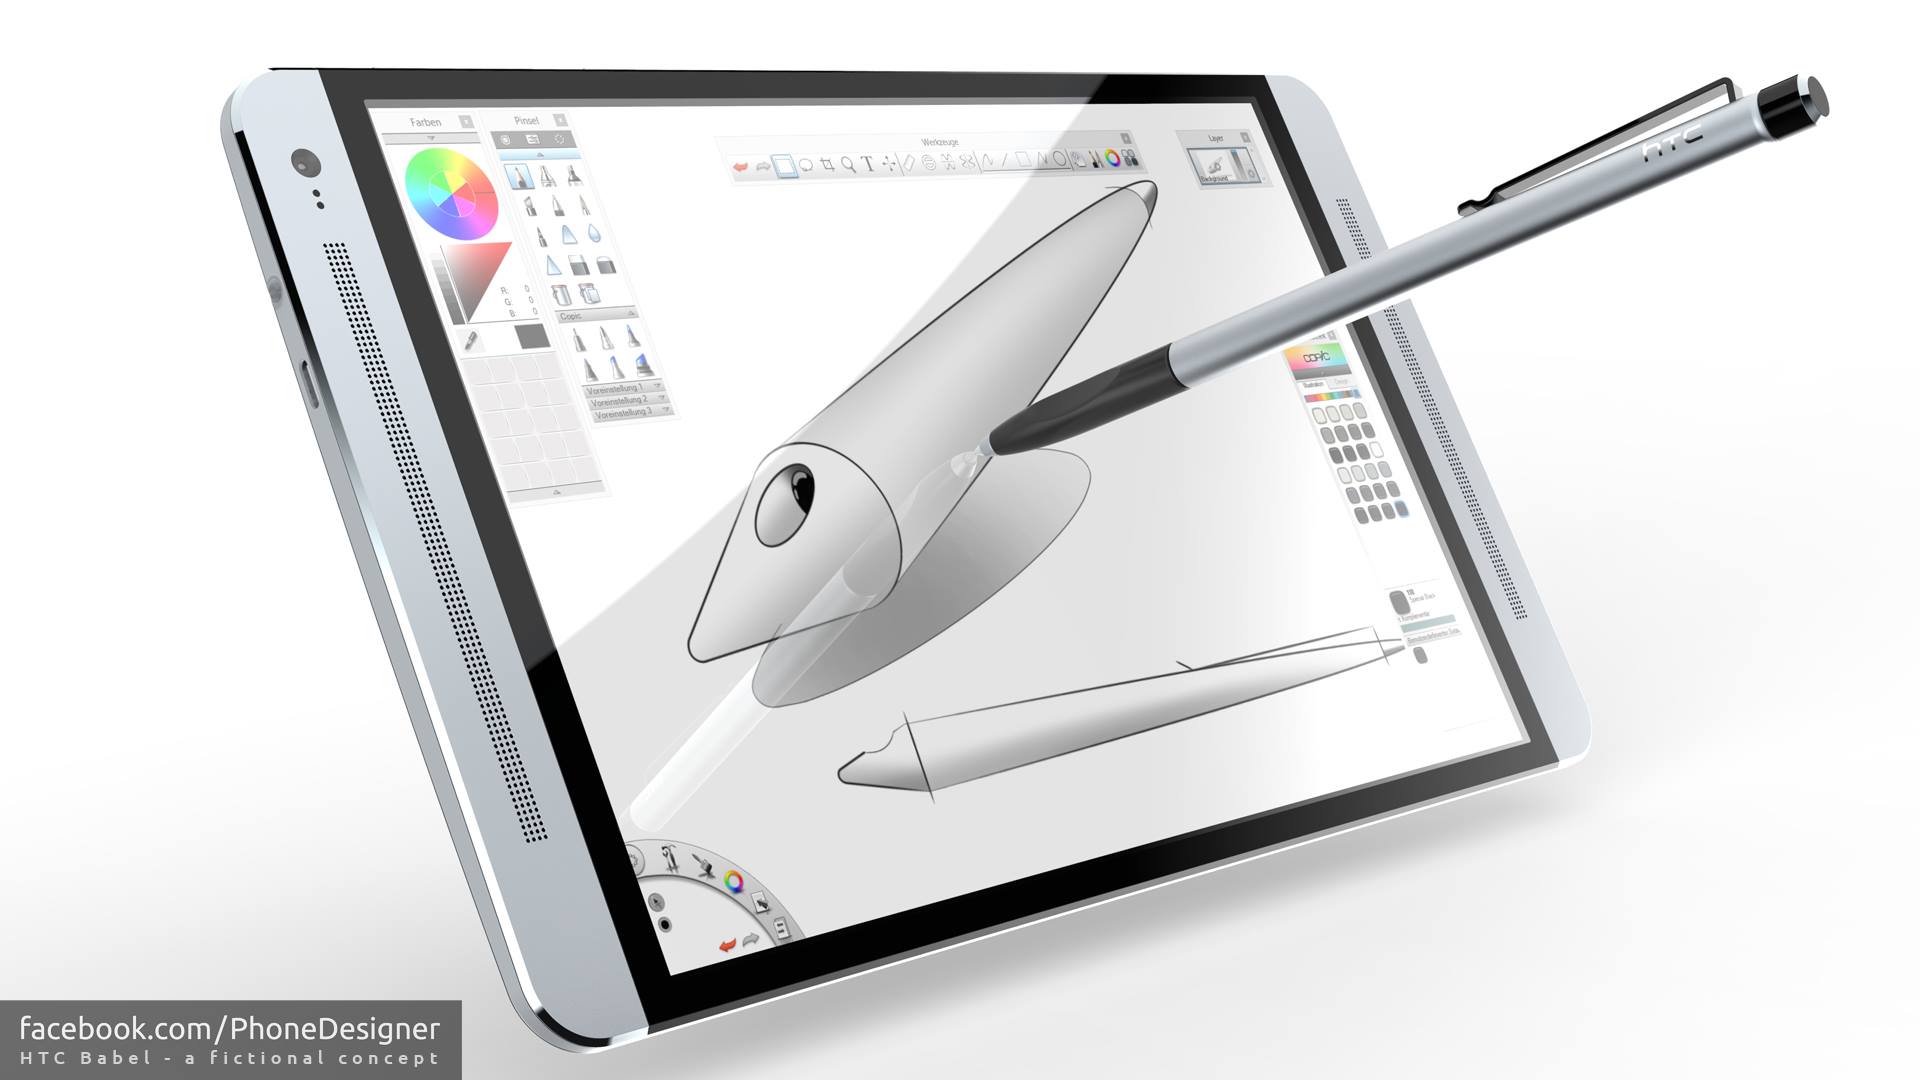 HTC Babel Tablet Runs Both 64-bit Windows 8 and Android, Has Stylus - Concept